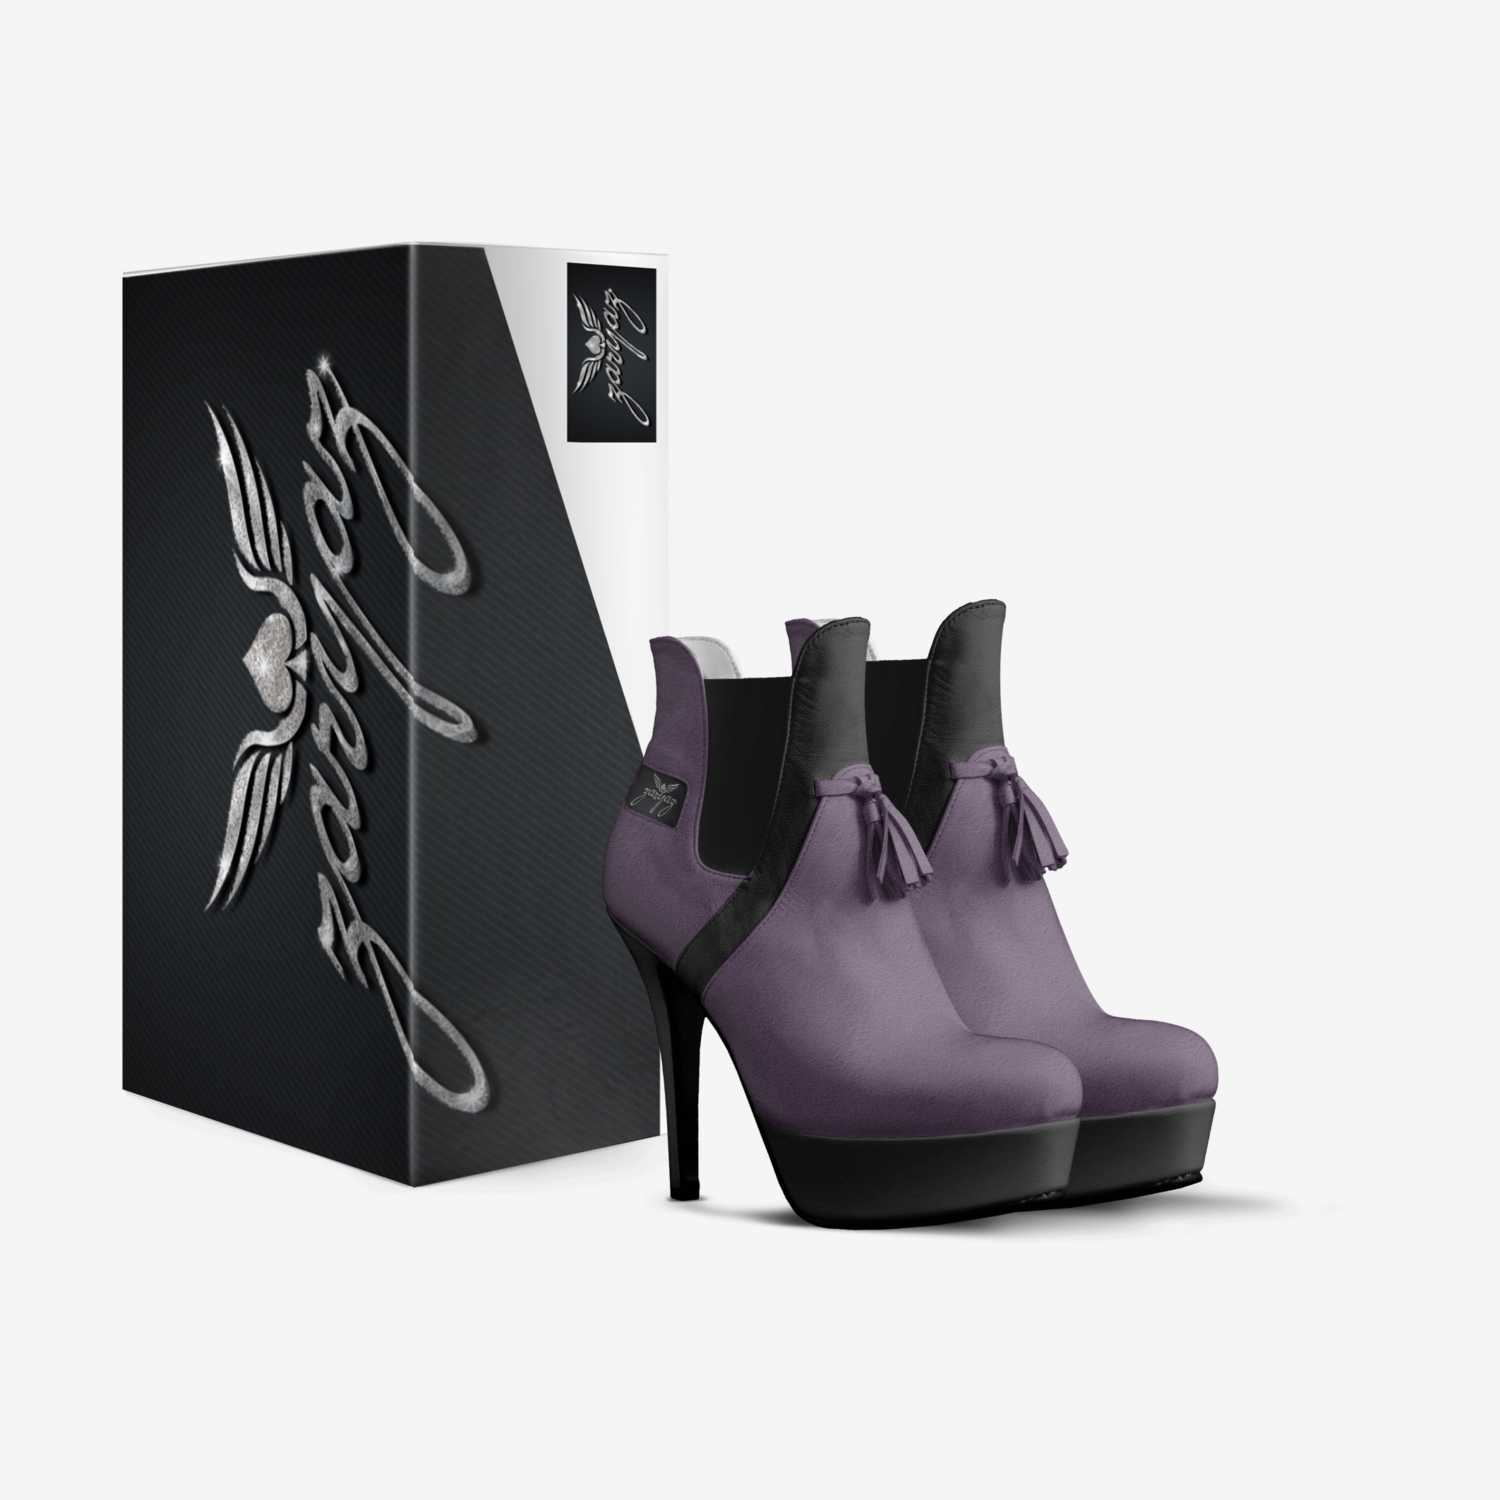 ZaryaZ TasselZ-P custom made in Italy shoes by Fai (holly Marie) Nothers | Box view